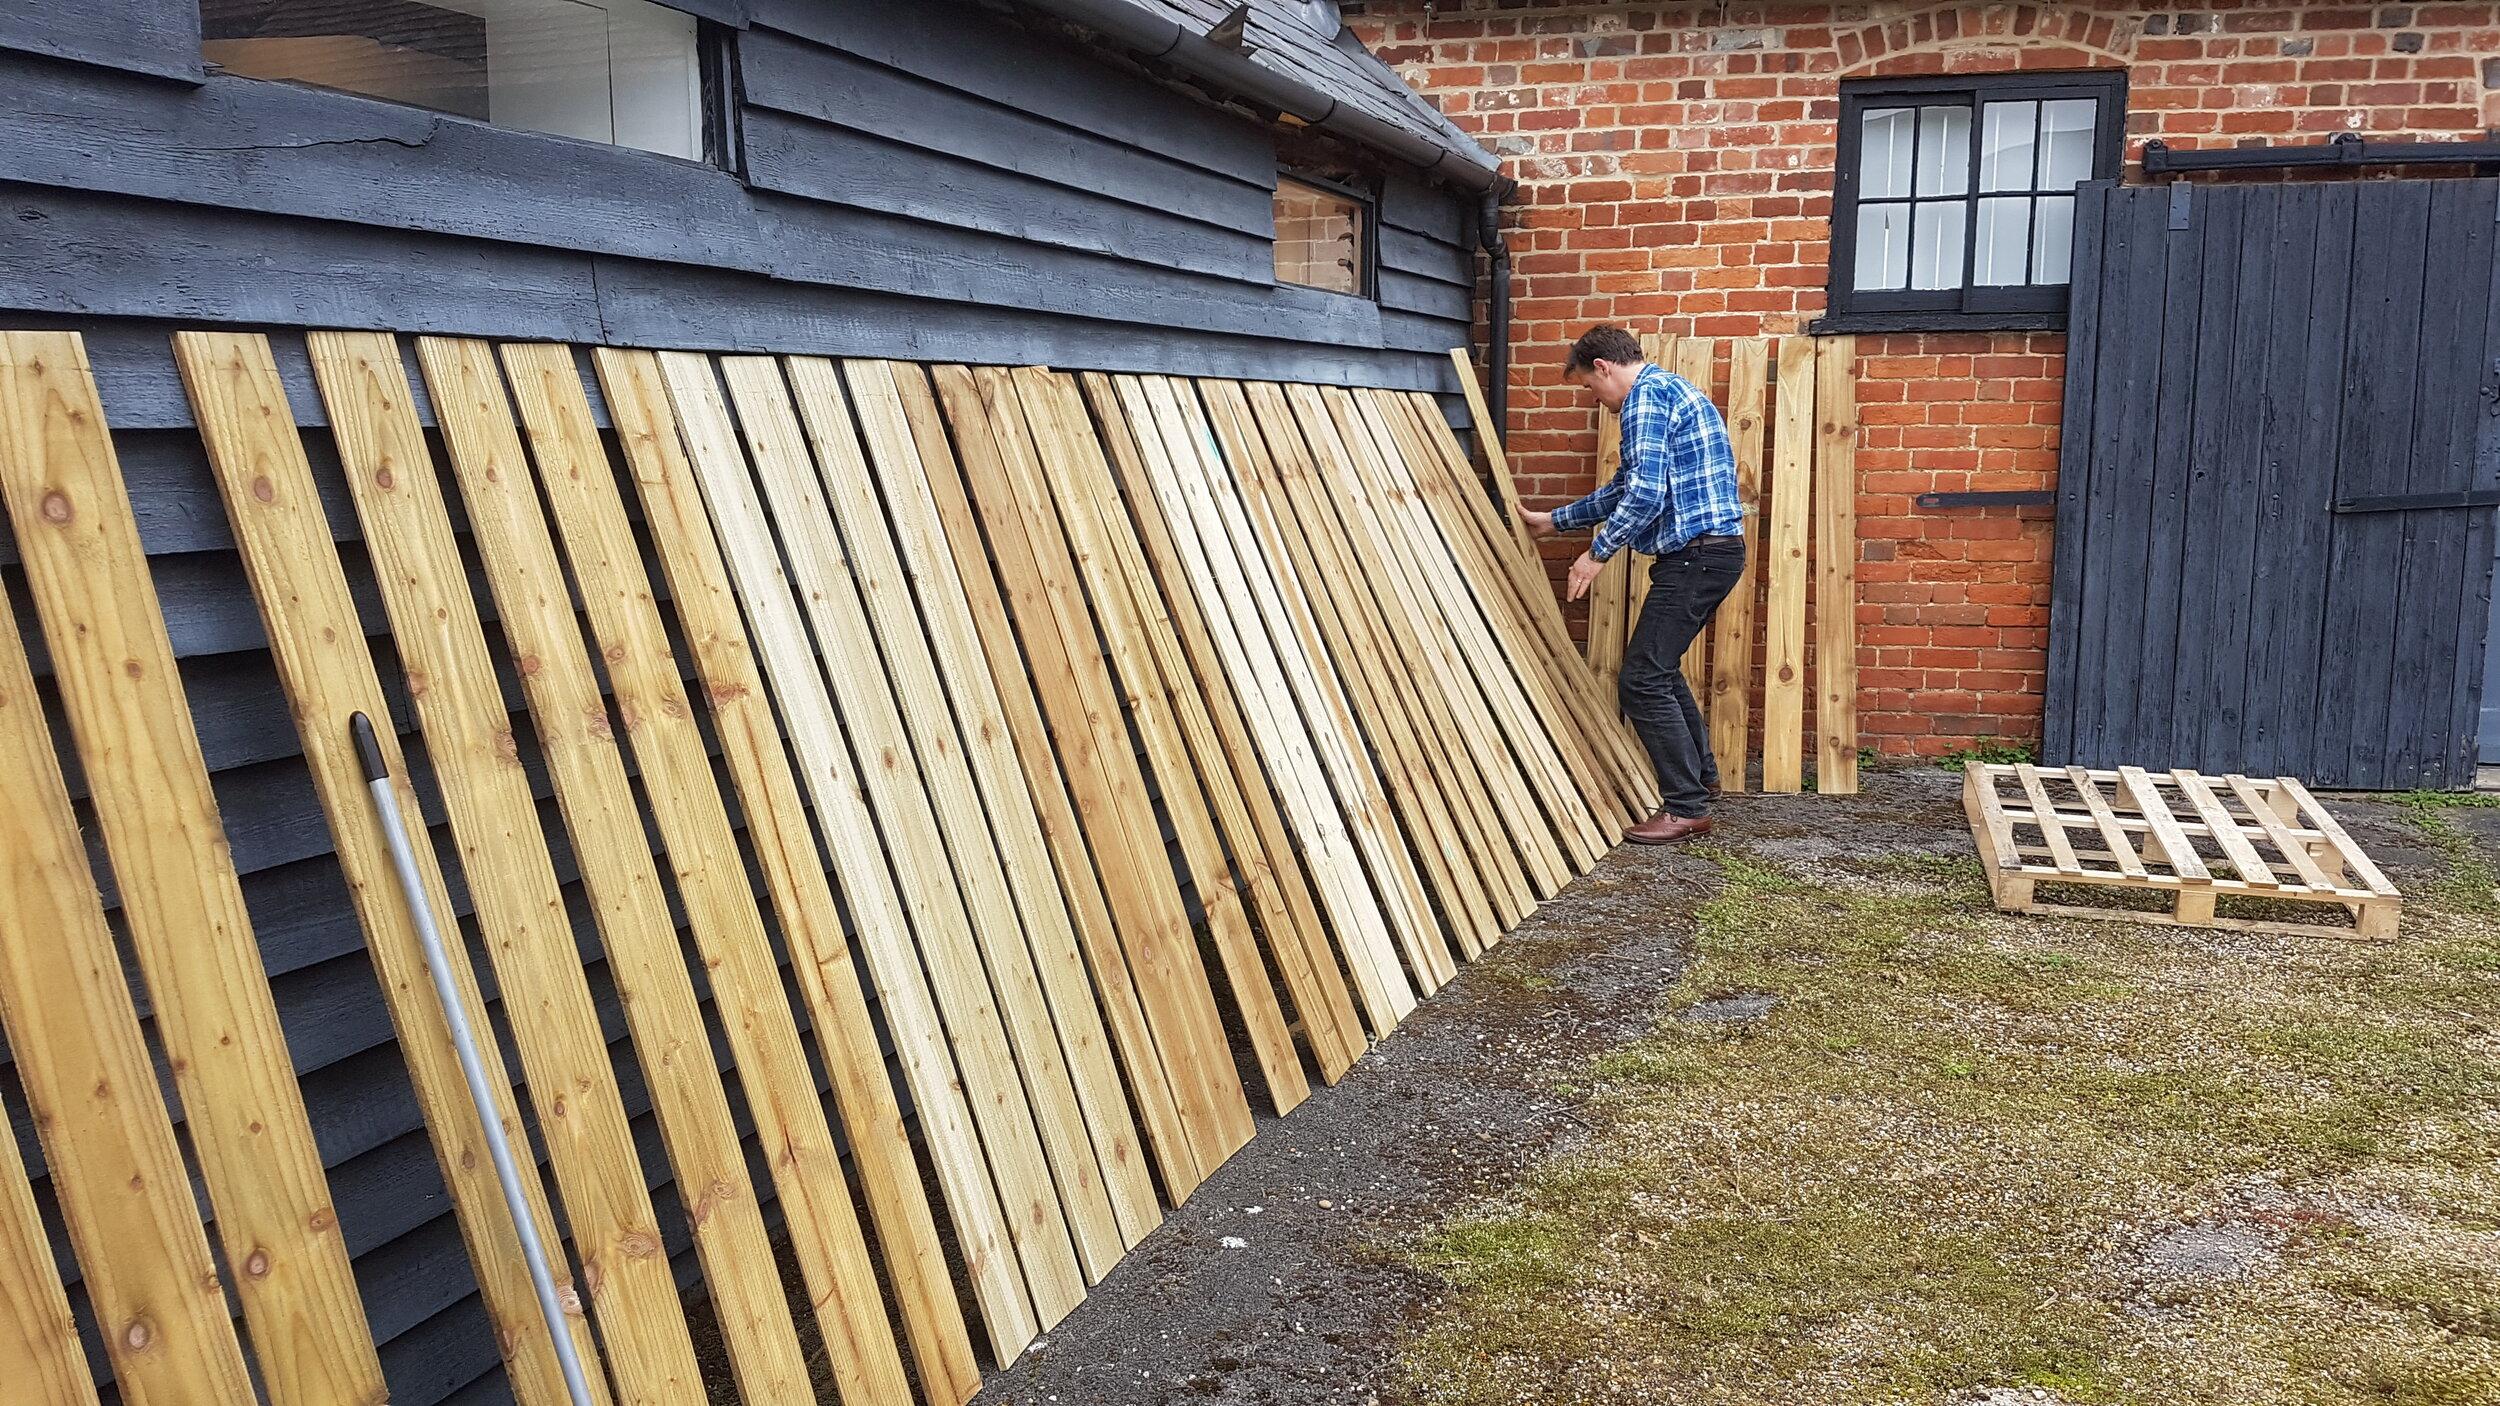 Colin inspecting and cleaning the fence boards outside Timbermark HQ